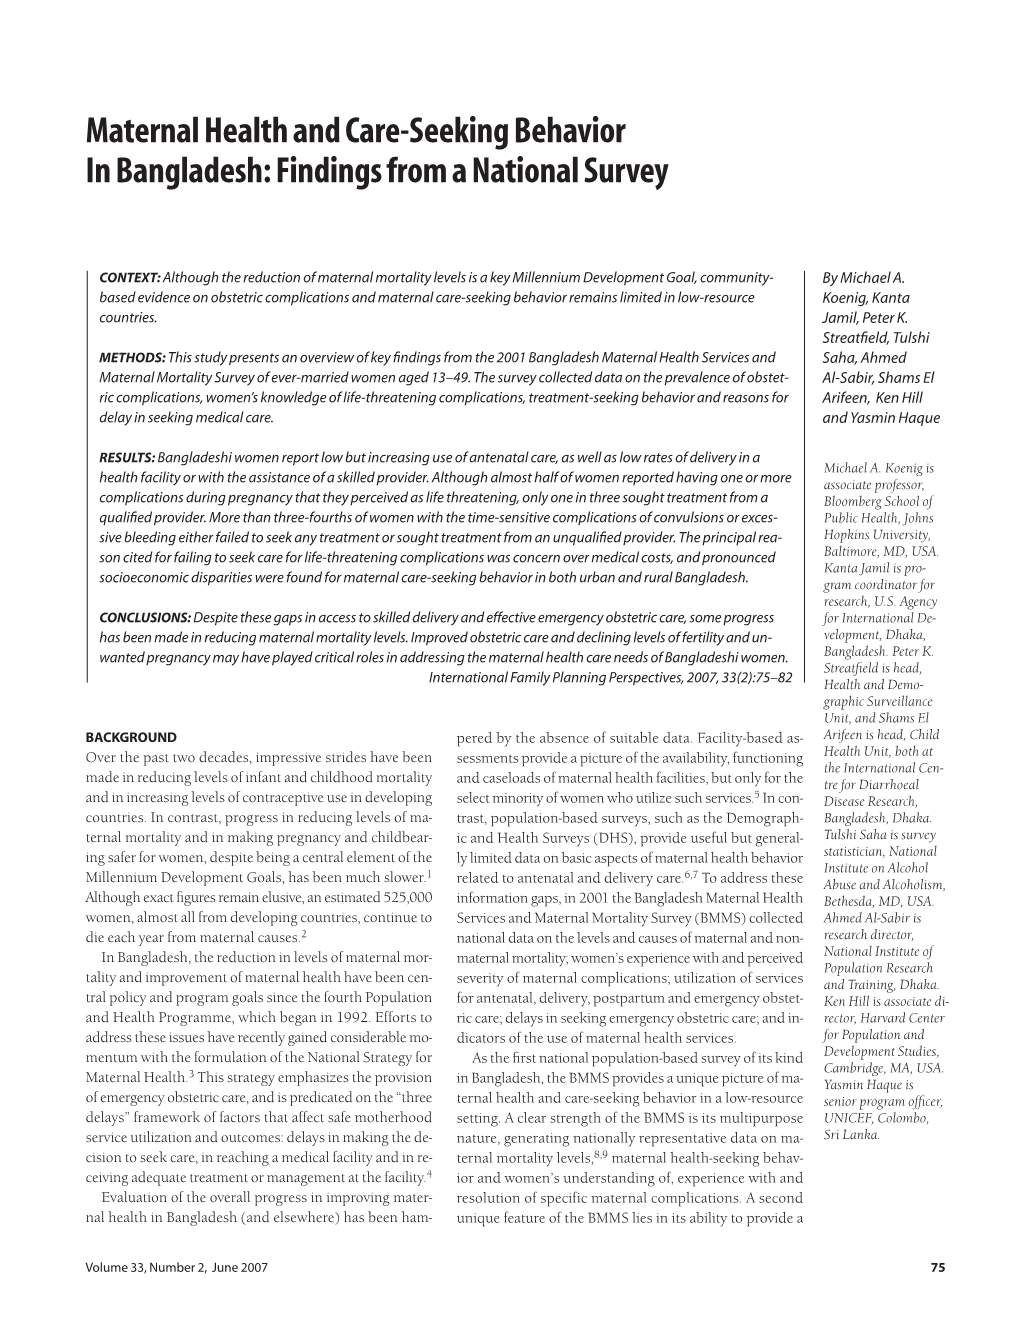 Maternal Health and Care-Seeking Behavior in Bangladesh: Findings from a National Survey